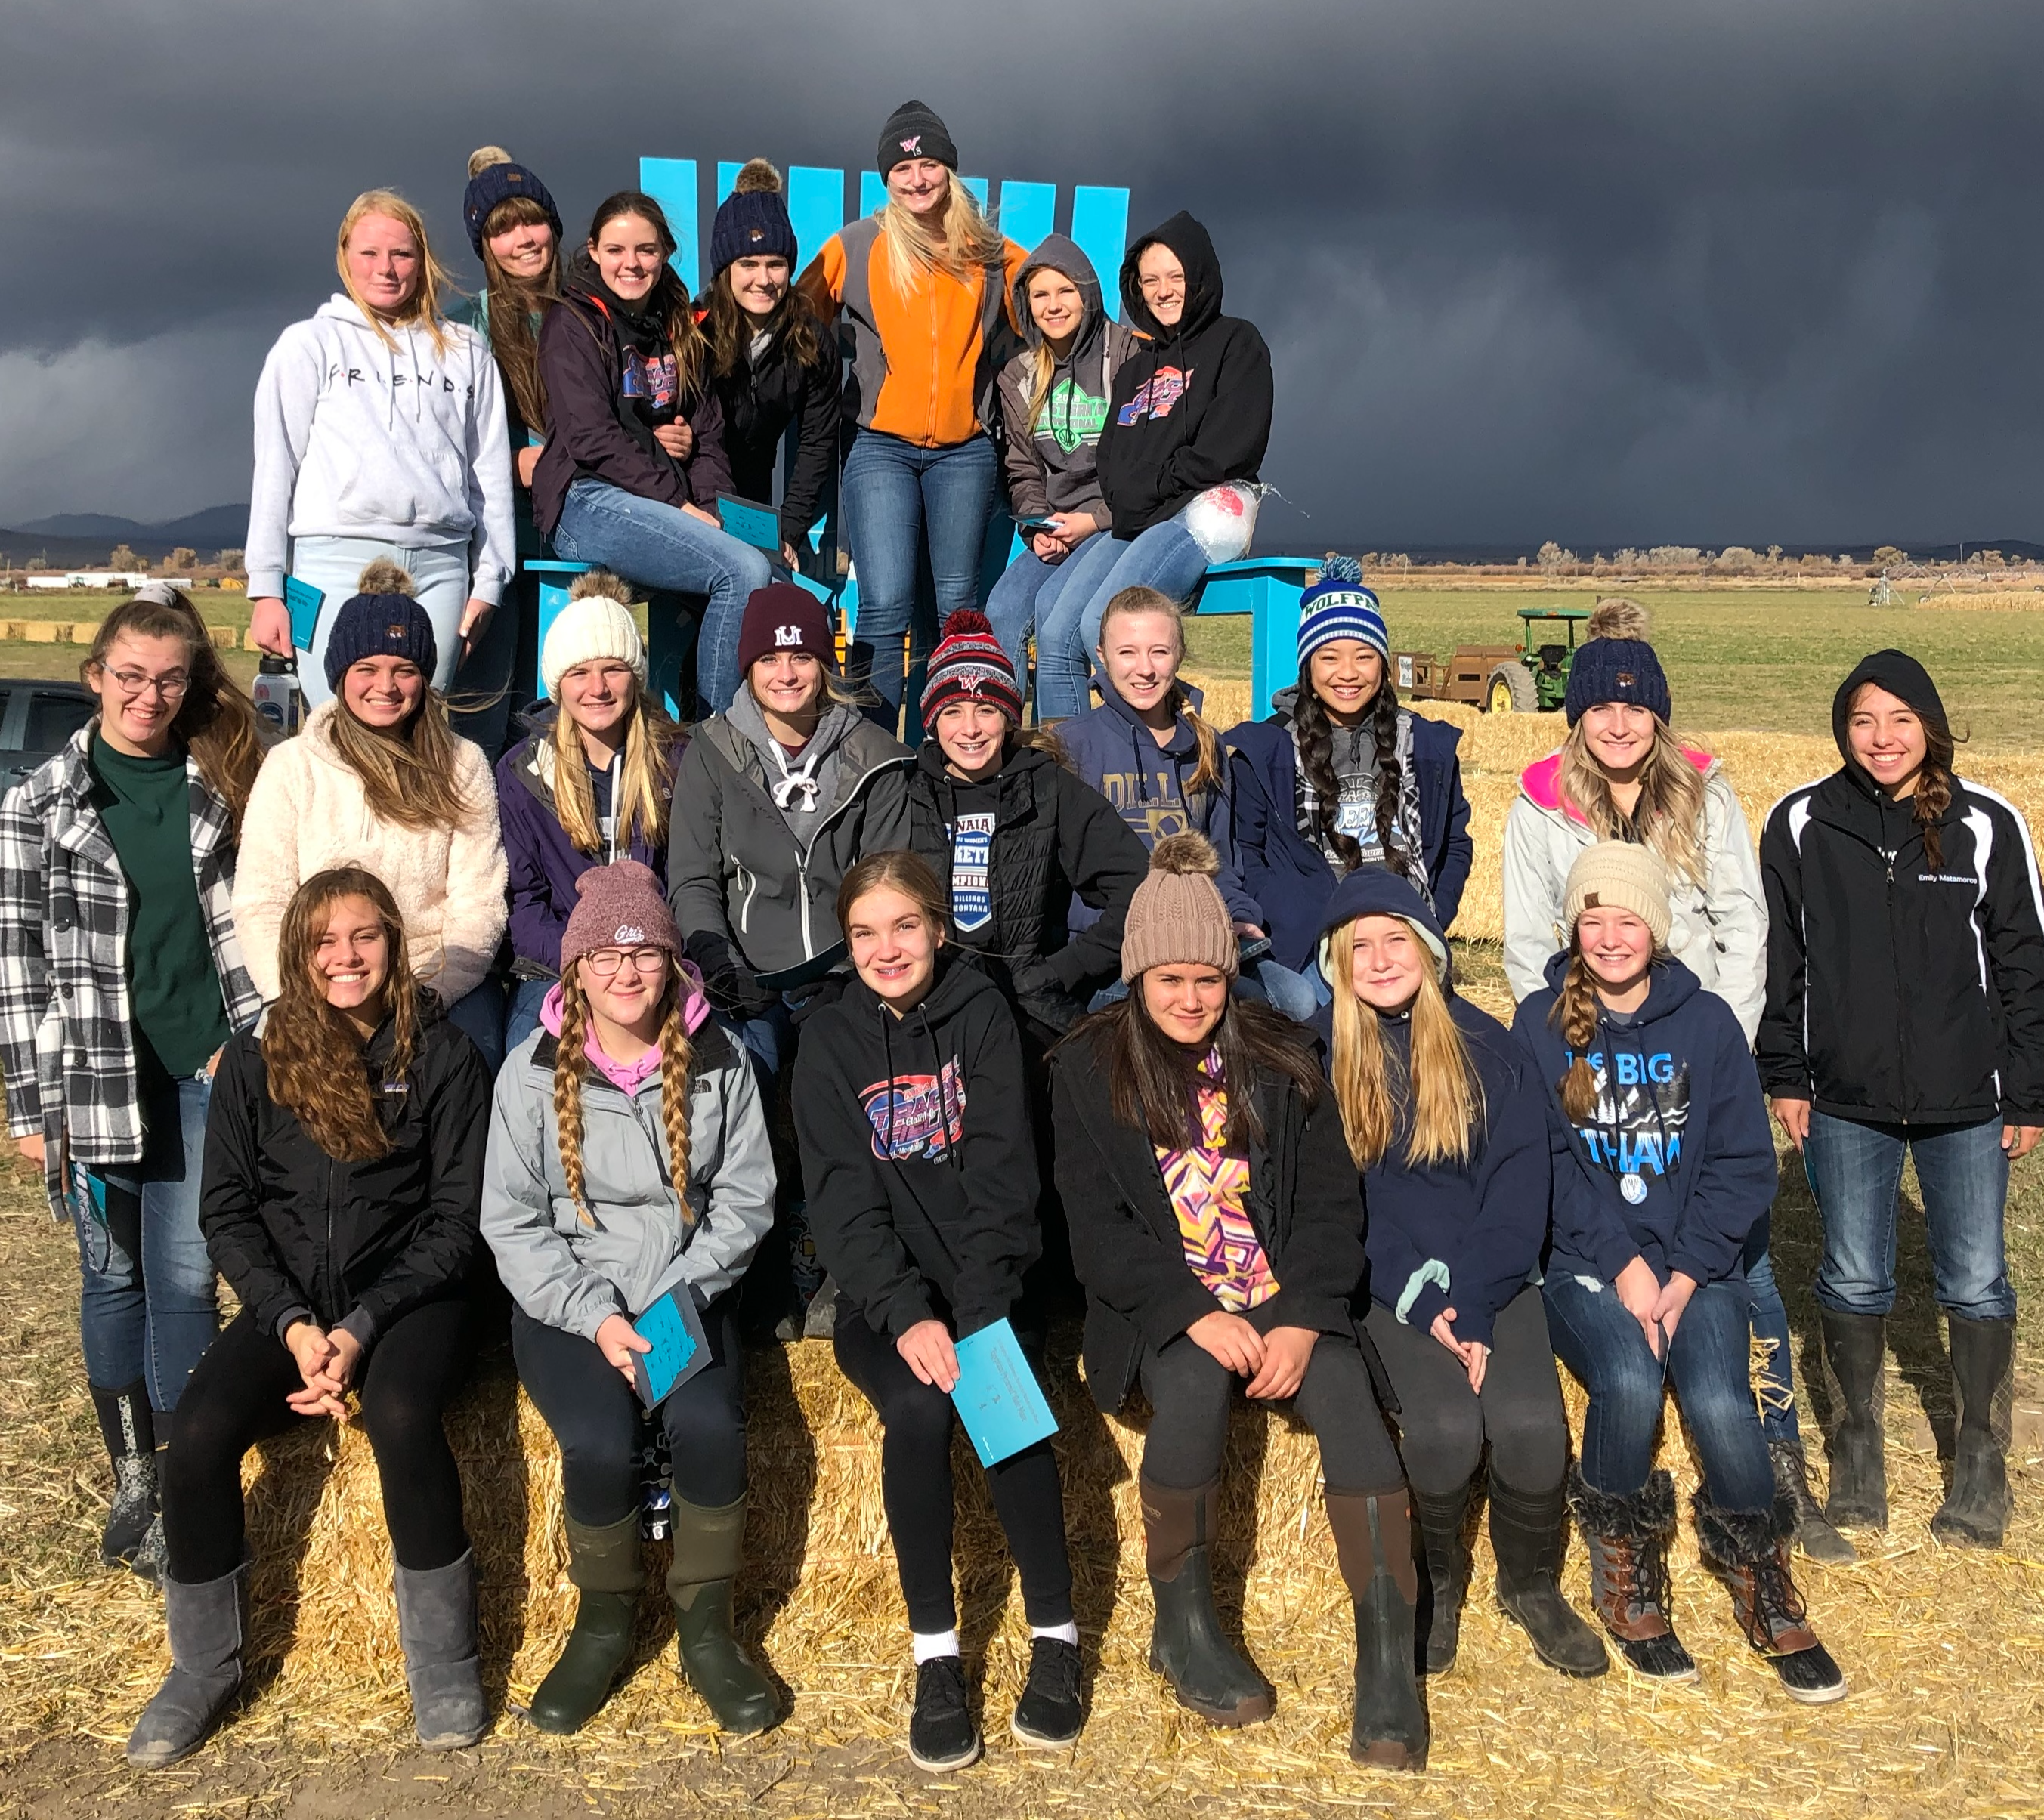 A photo of the volleyball team at the Beaverhead Maze in October 2019